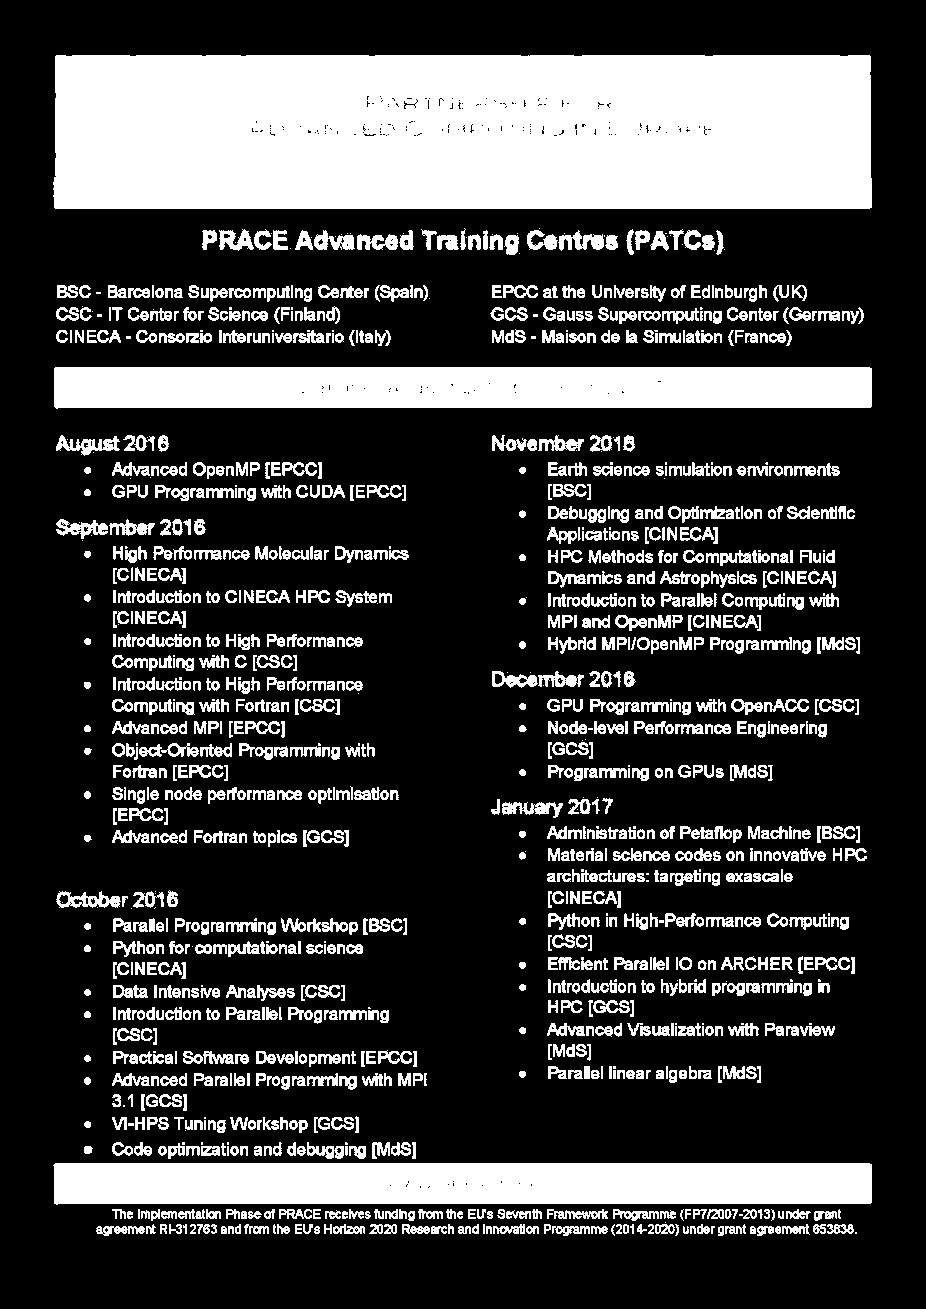 PATC Programme 2016-2017 79 courses, 215 training days New courses on forward-looking topics